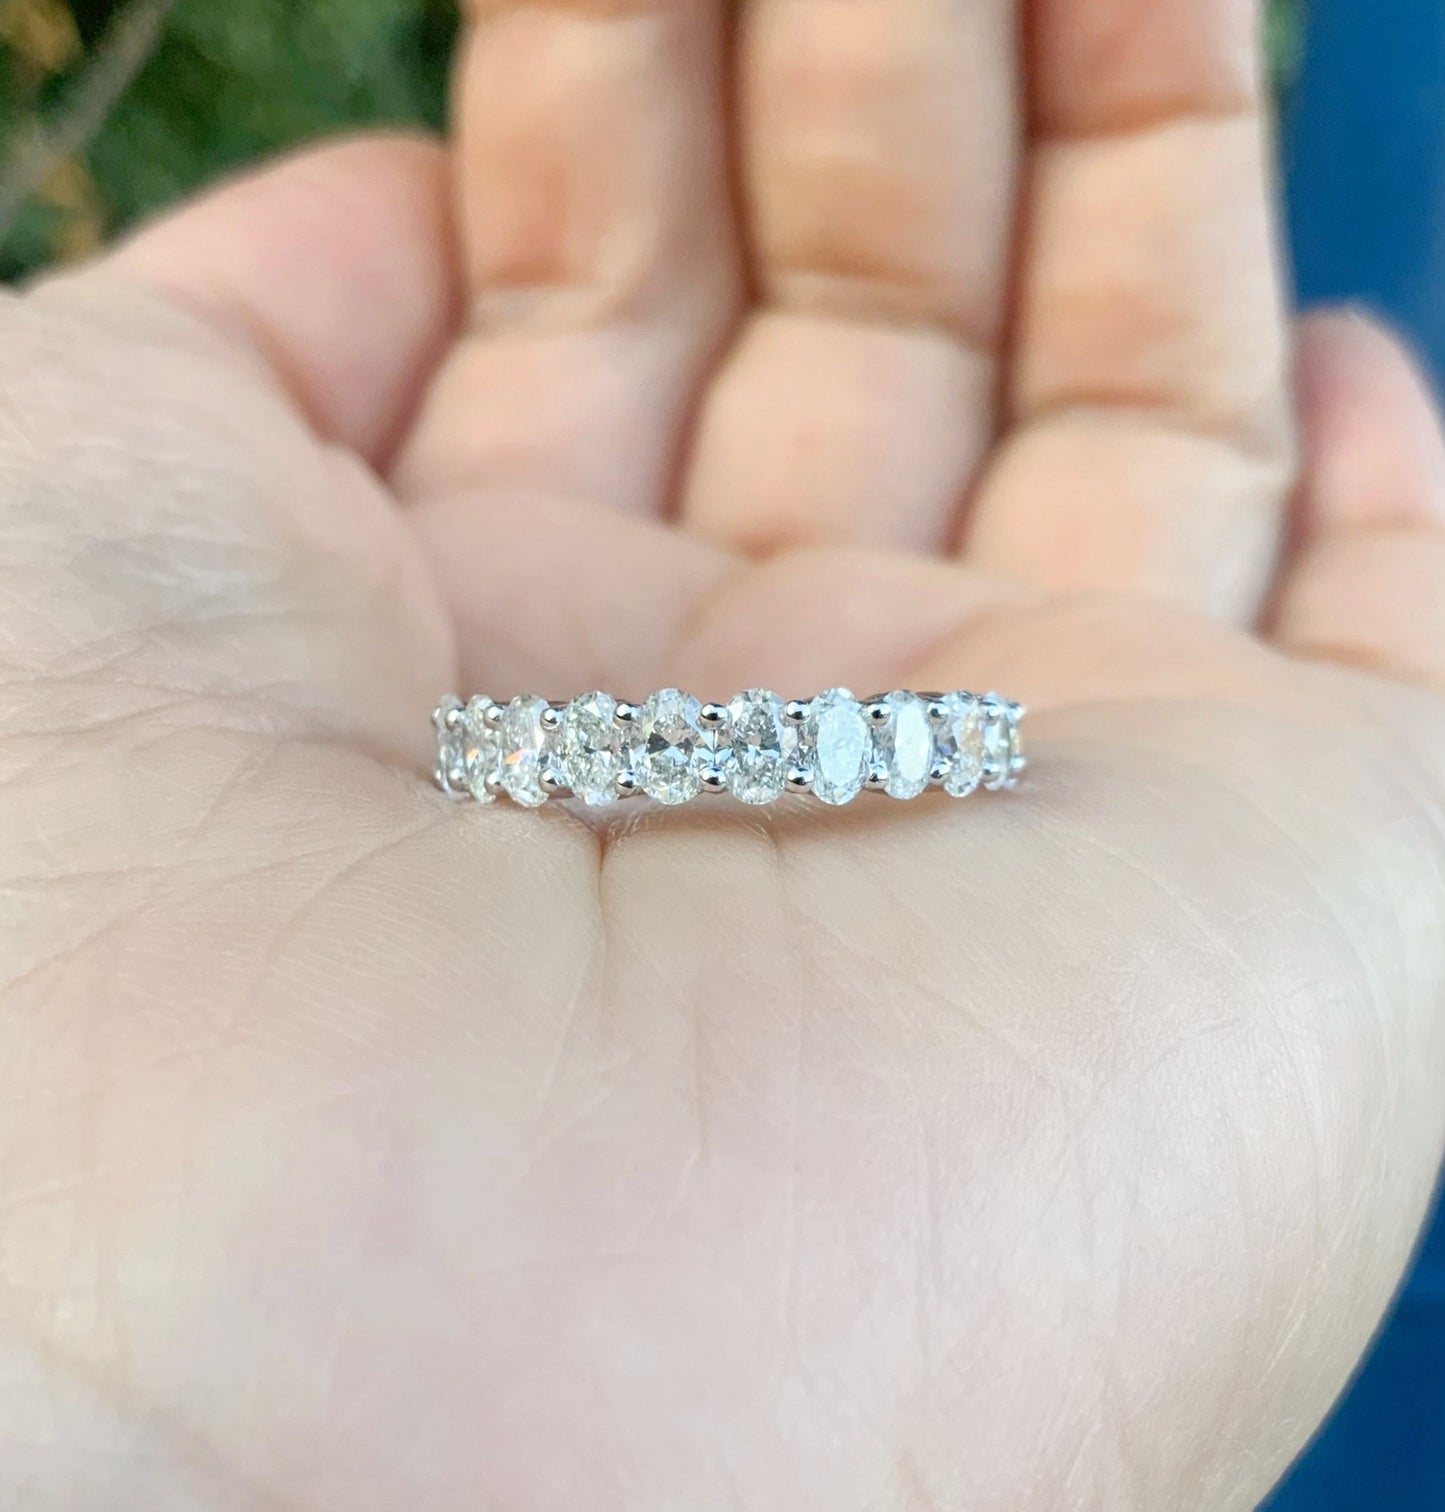 Reserved for Kate ONLY/ 1 Carat Band with 10 Oval Natural Diamonds/ Comes with APPRAISAL CERTIFICATE